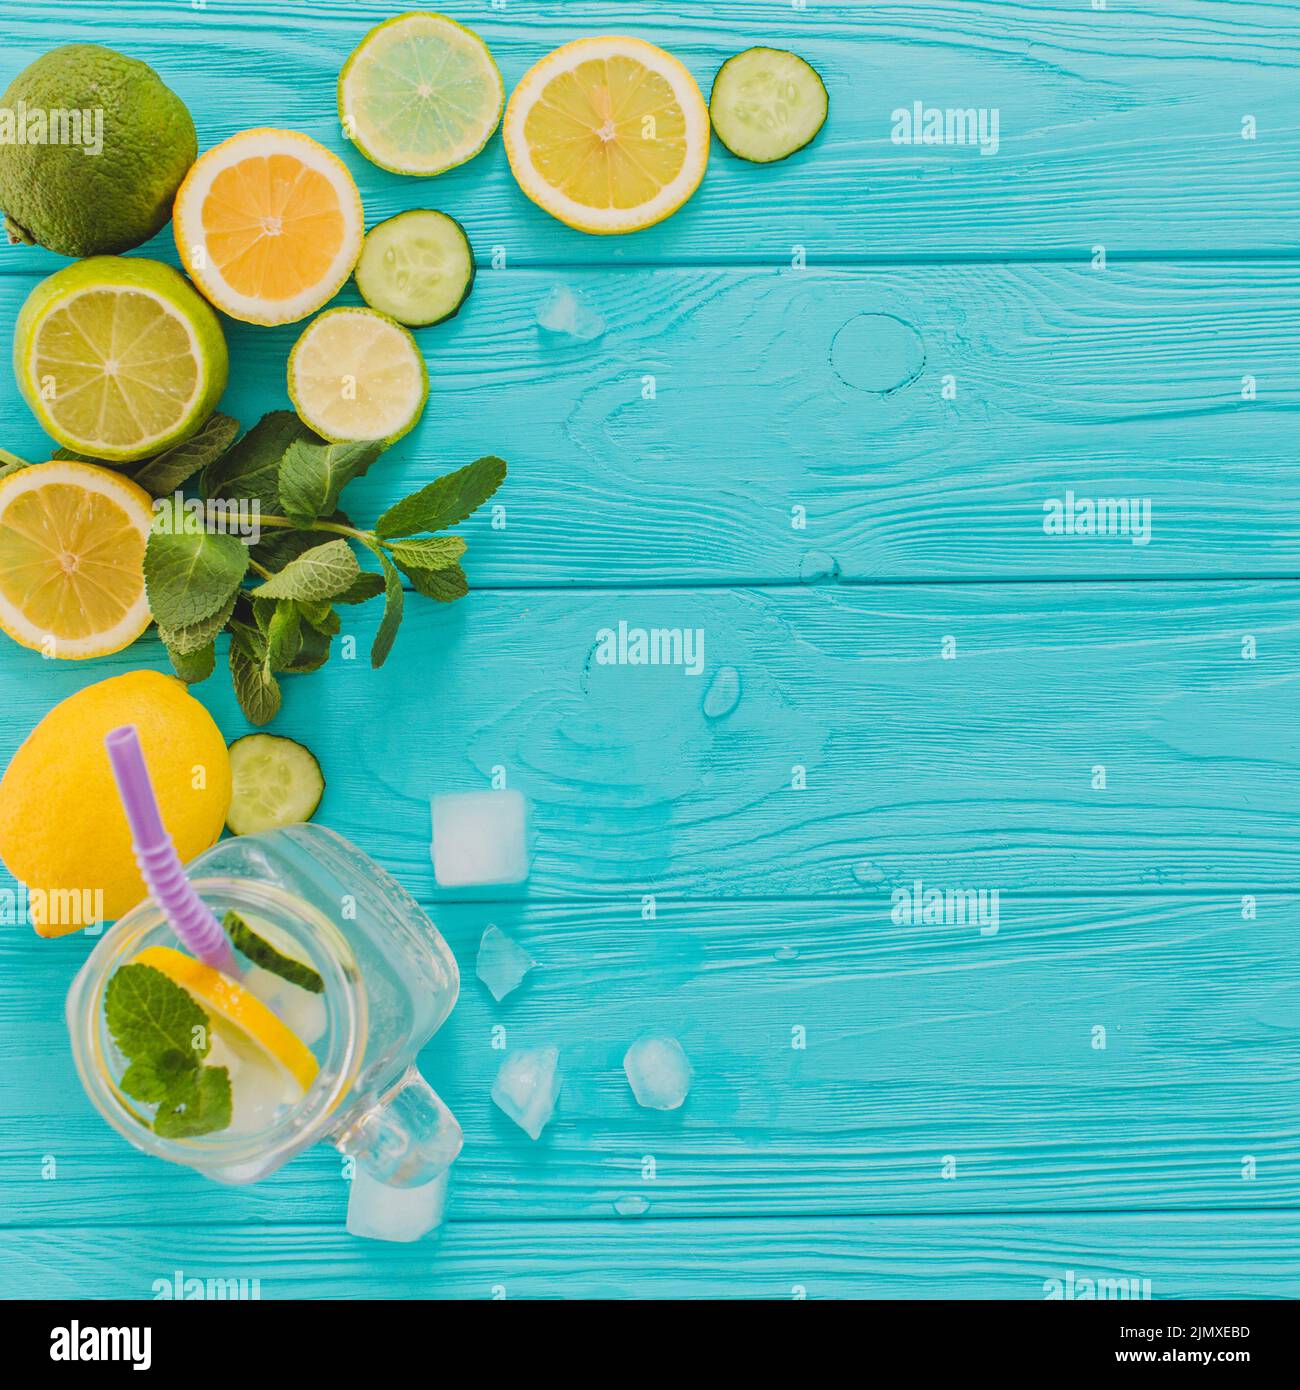 Blue wooden surface with lemons limes Stock Photo